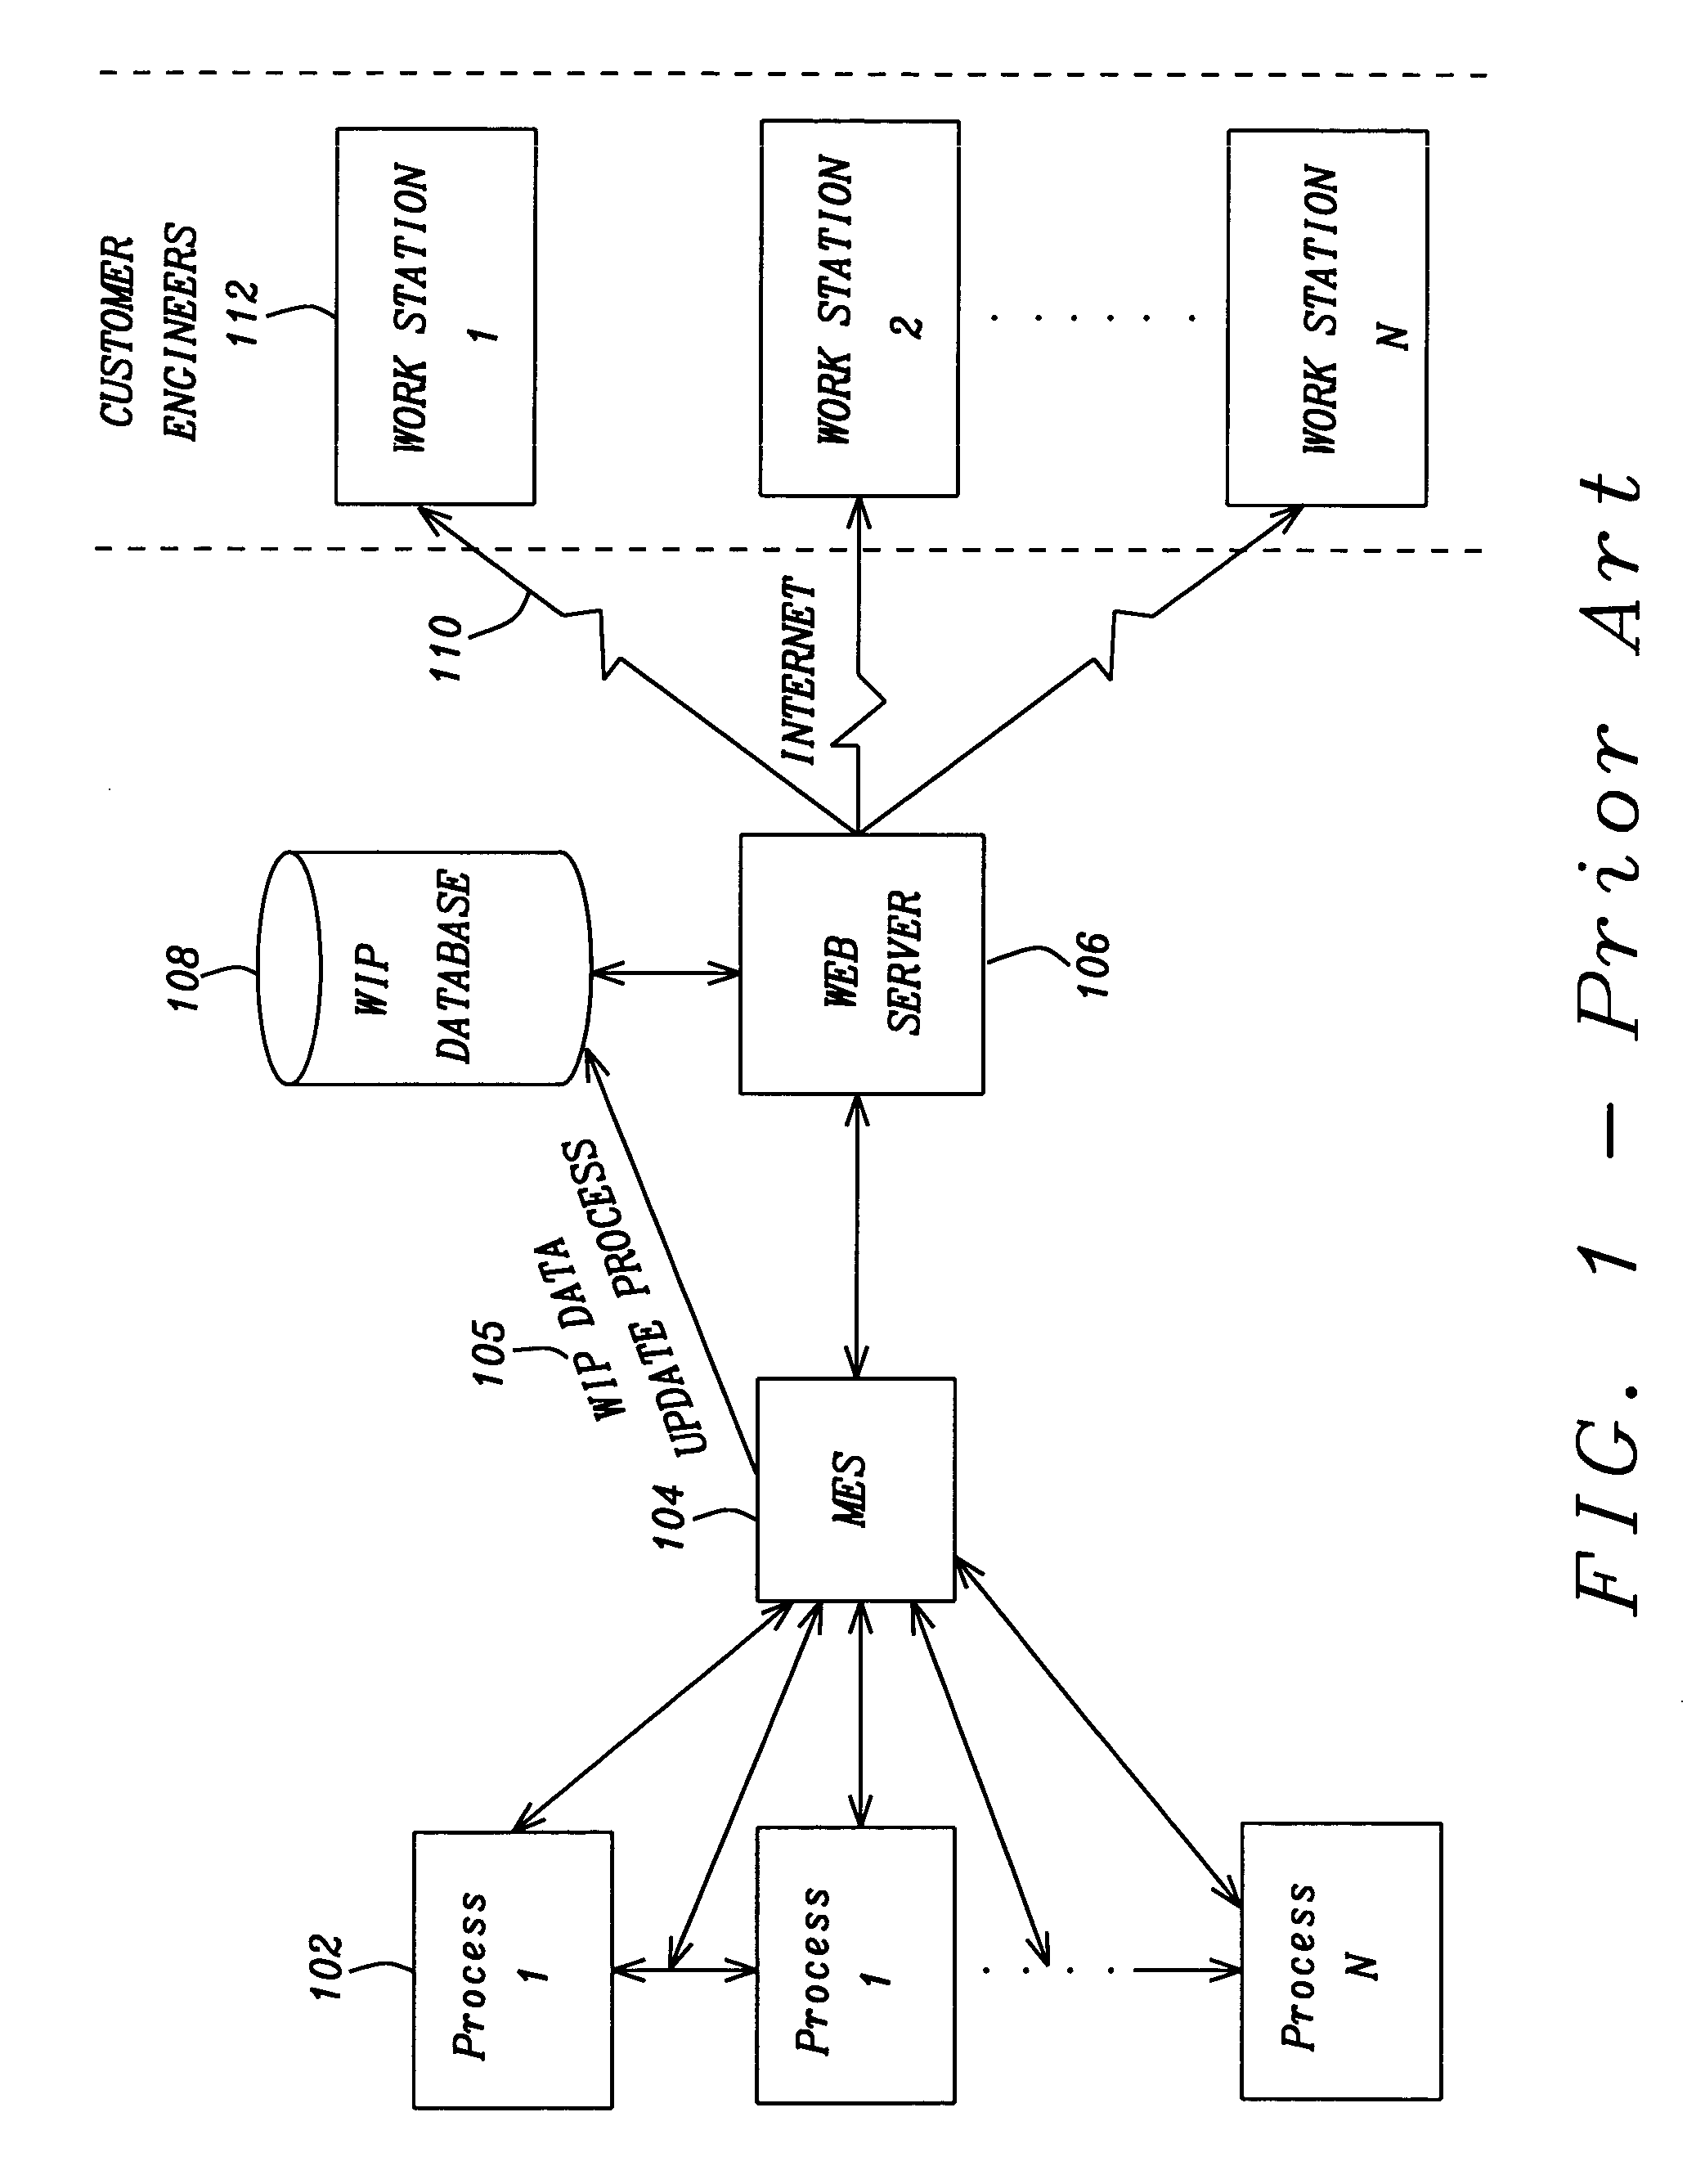 Web service and method for customers to define their own alert for real-time production status